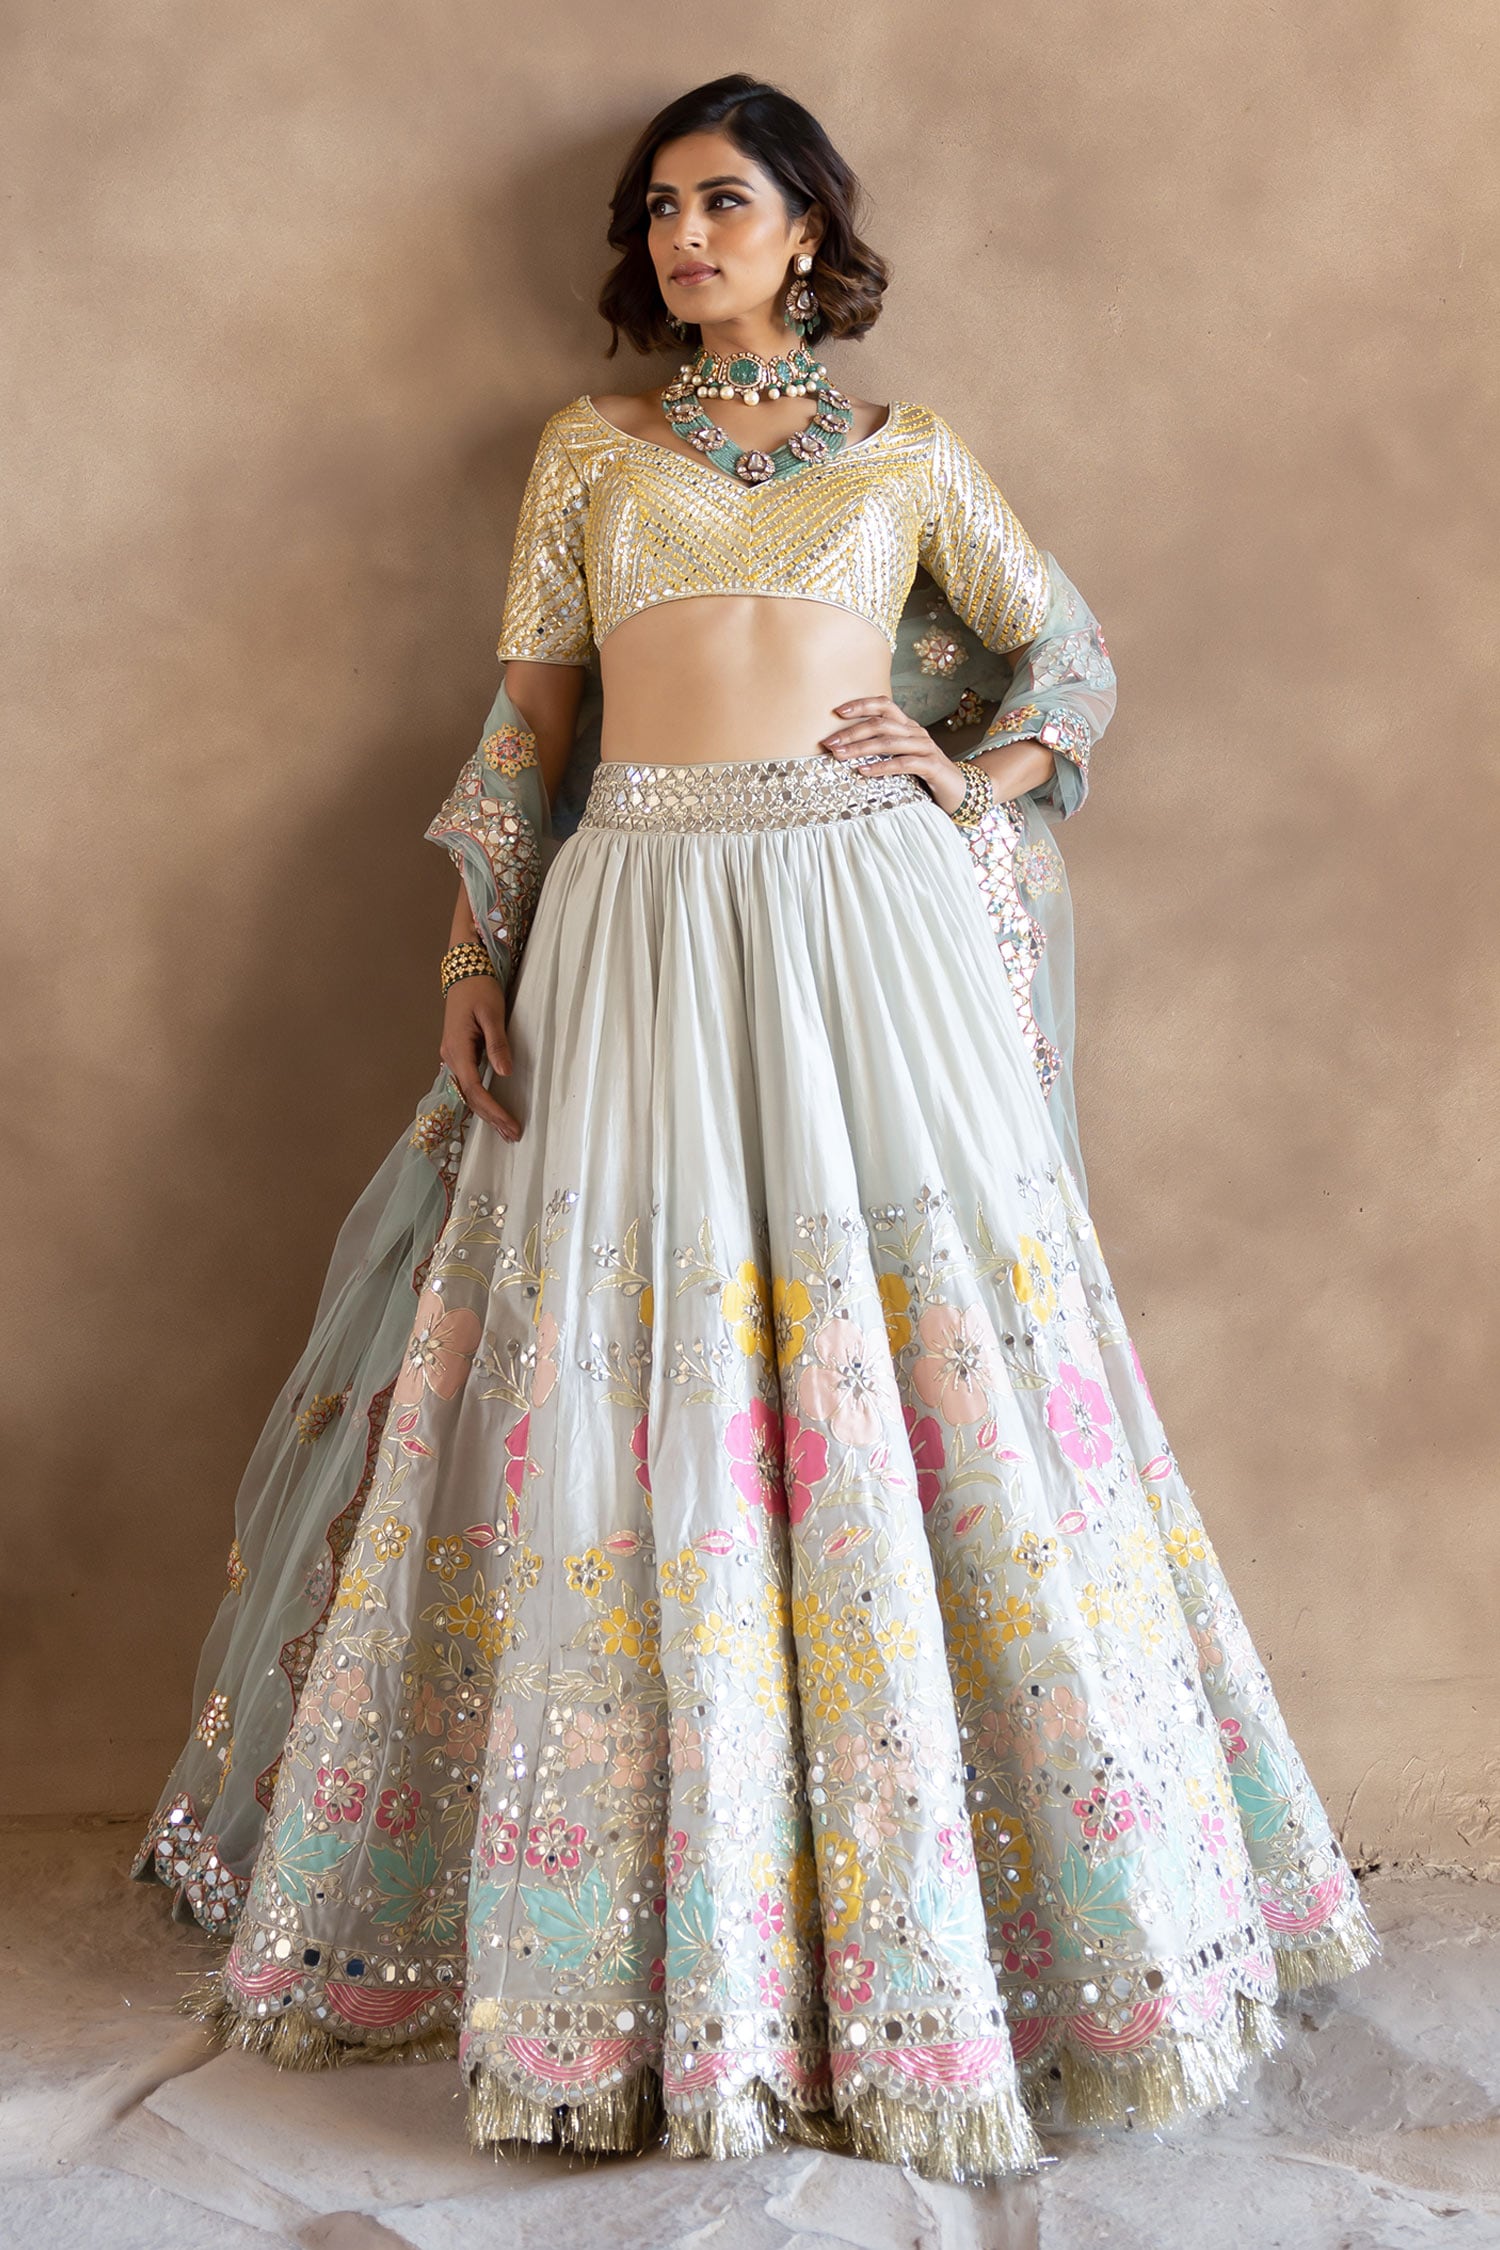 Pink Floral Lehenga Choli with attached dupatta - Babeehive